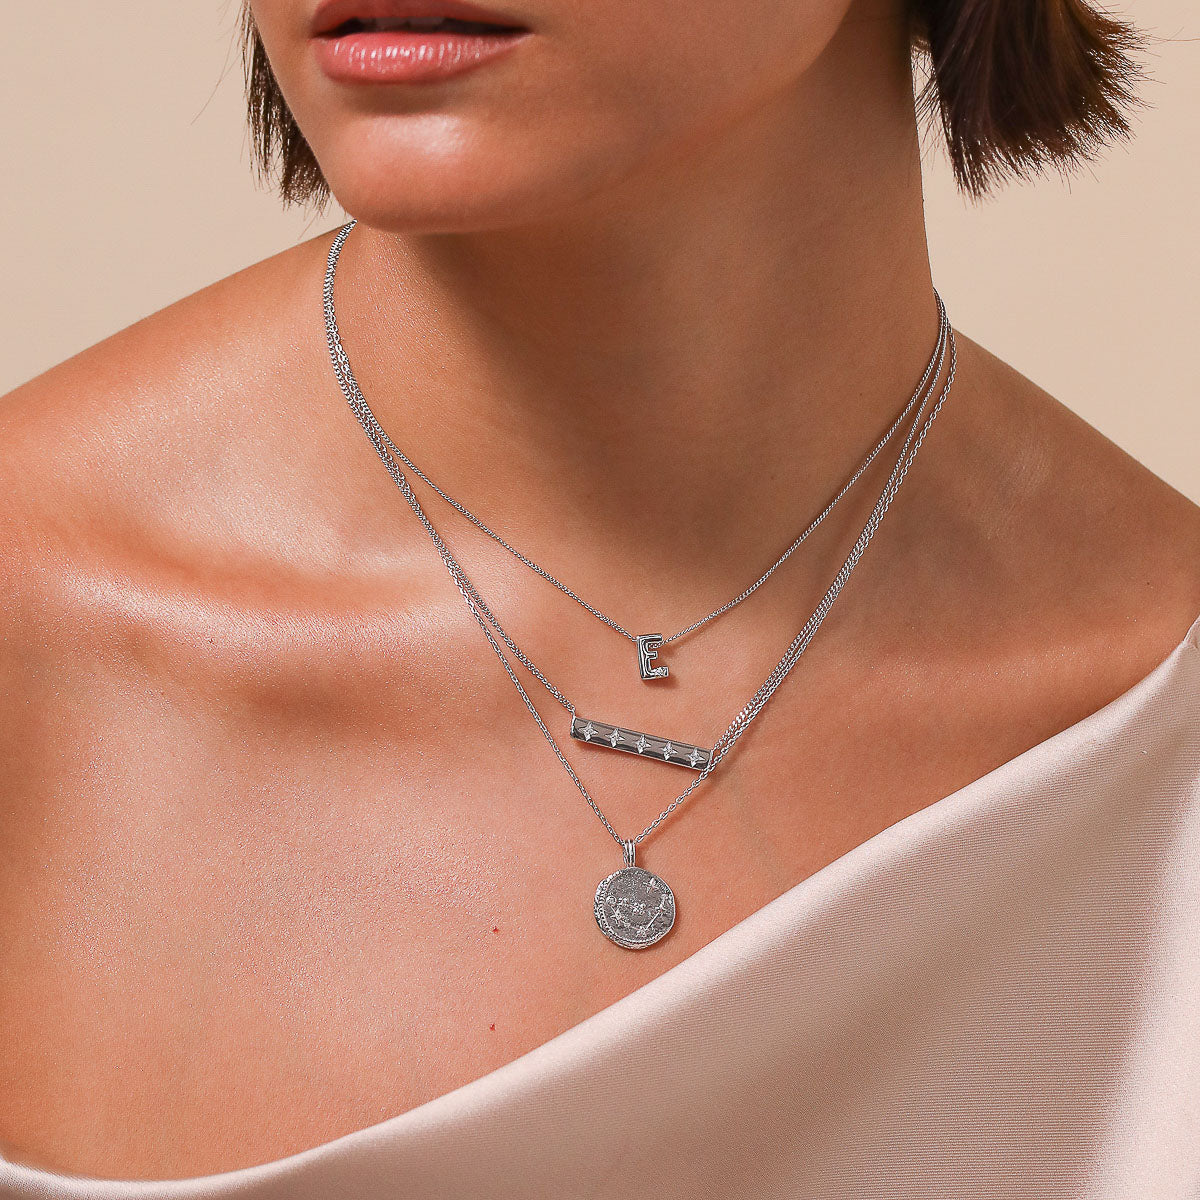 Capricorn Zodiac Pendant Necklace in Silver worn layered with necklaces